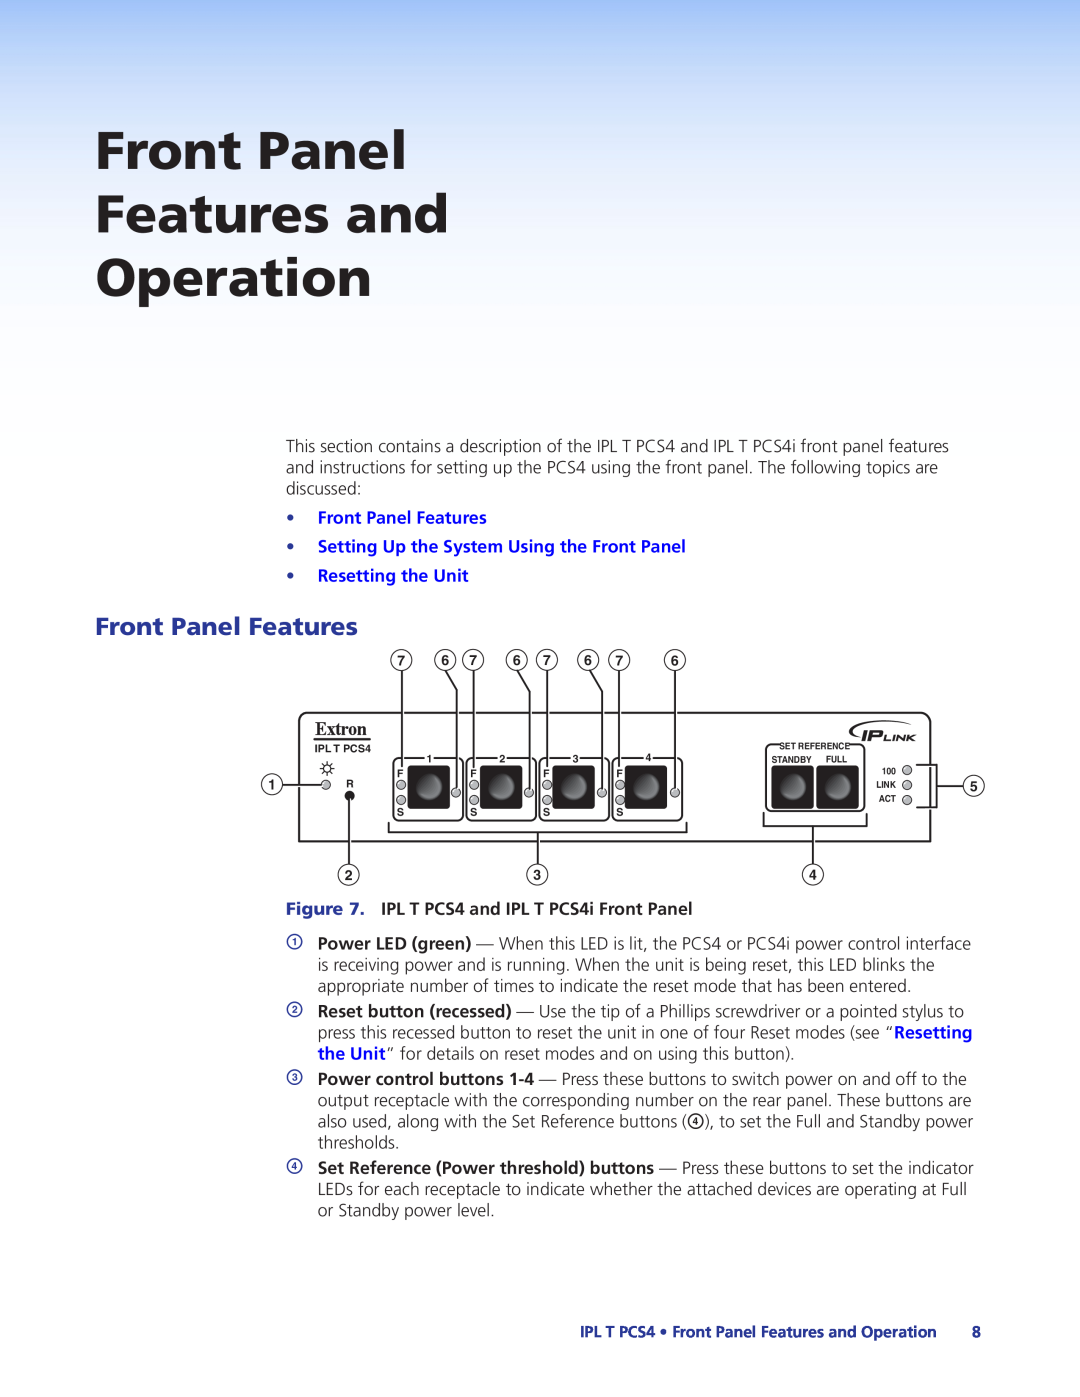 Extron electronic IPL T PCS4i manual Front Panel Features and Operation, Resetting the Unit 